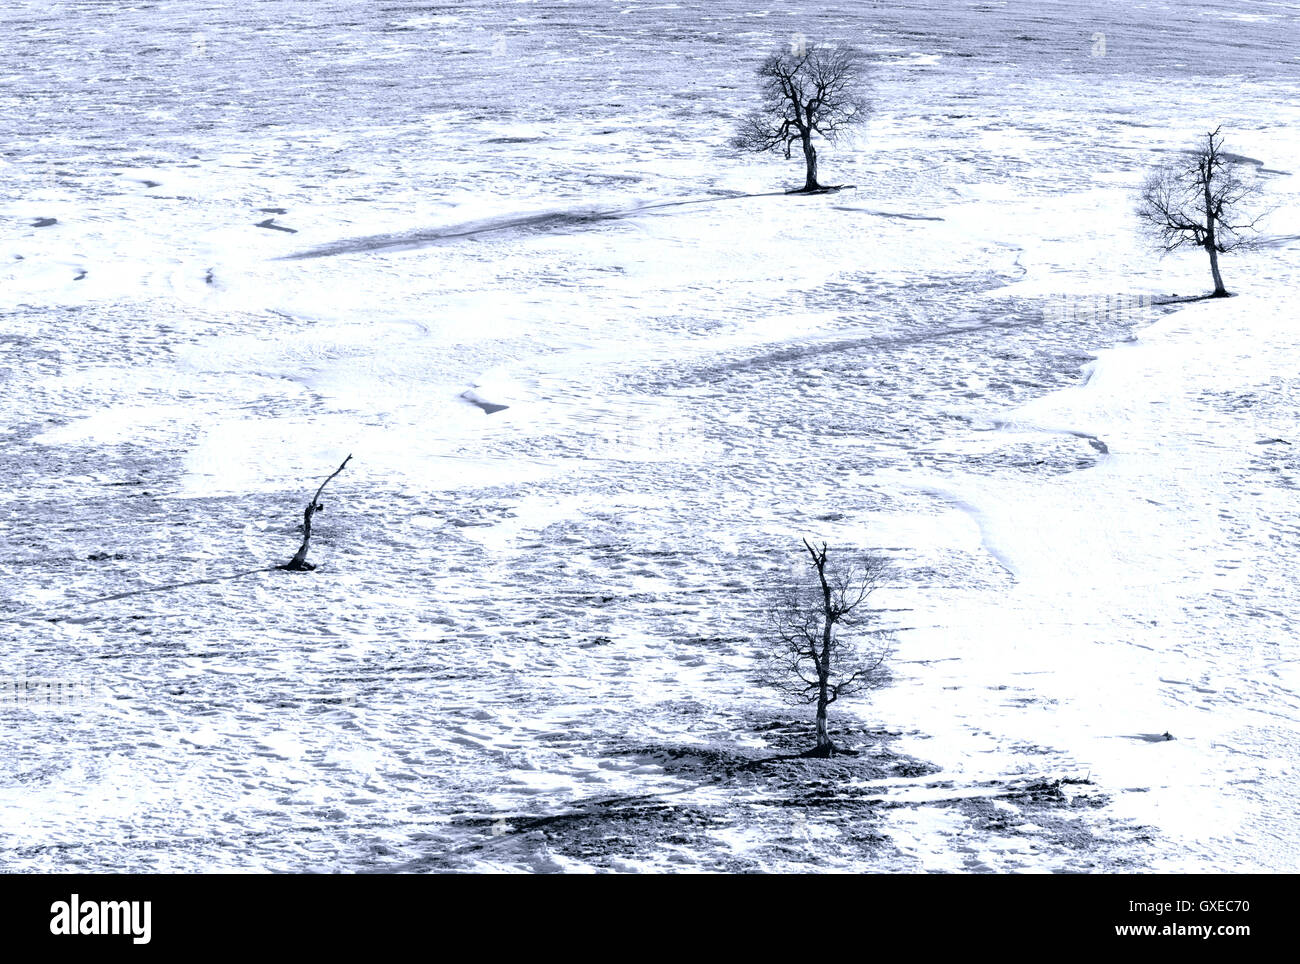 Seasonal nature winter image: mountain landscape with trees (dark silhouettes) at a snowy mountain descent (slope) field with a Stock Photo